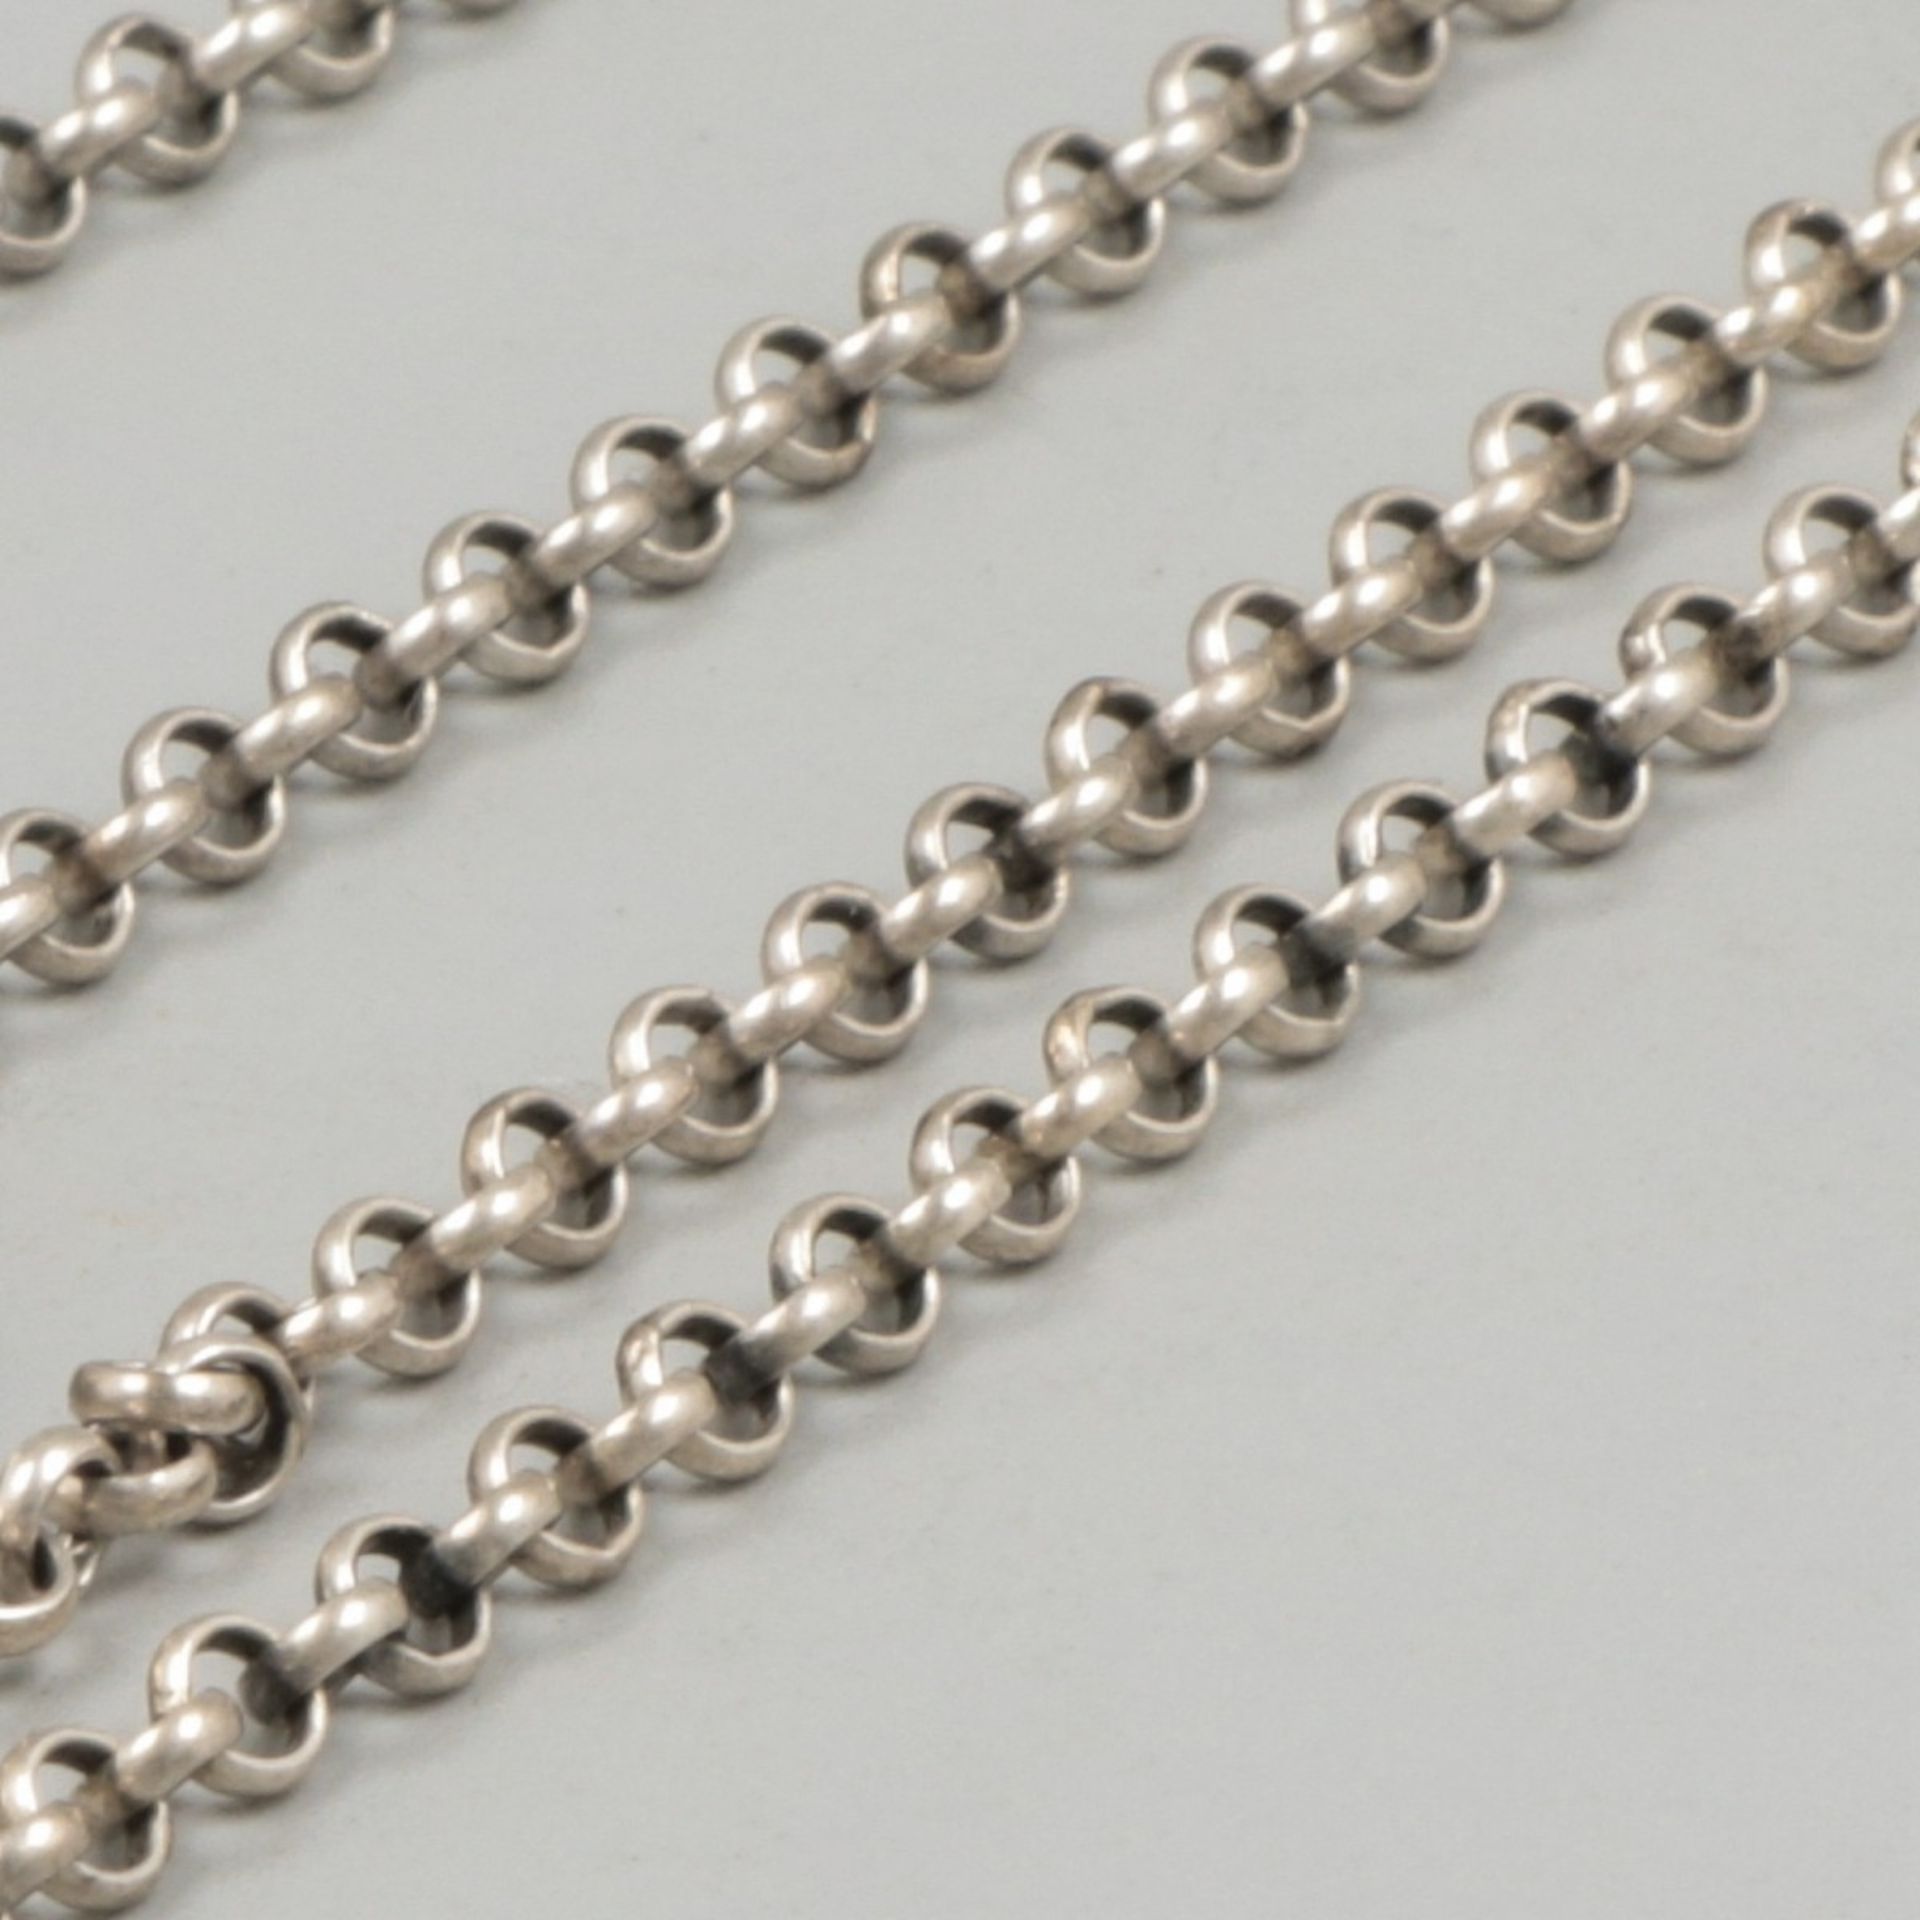 2-piece lot jasseron chains with knitting caps silver. - Image 3 of 5